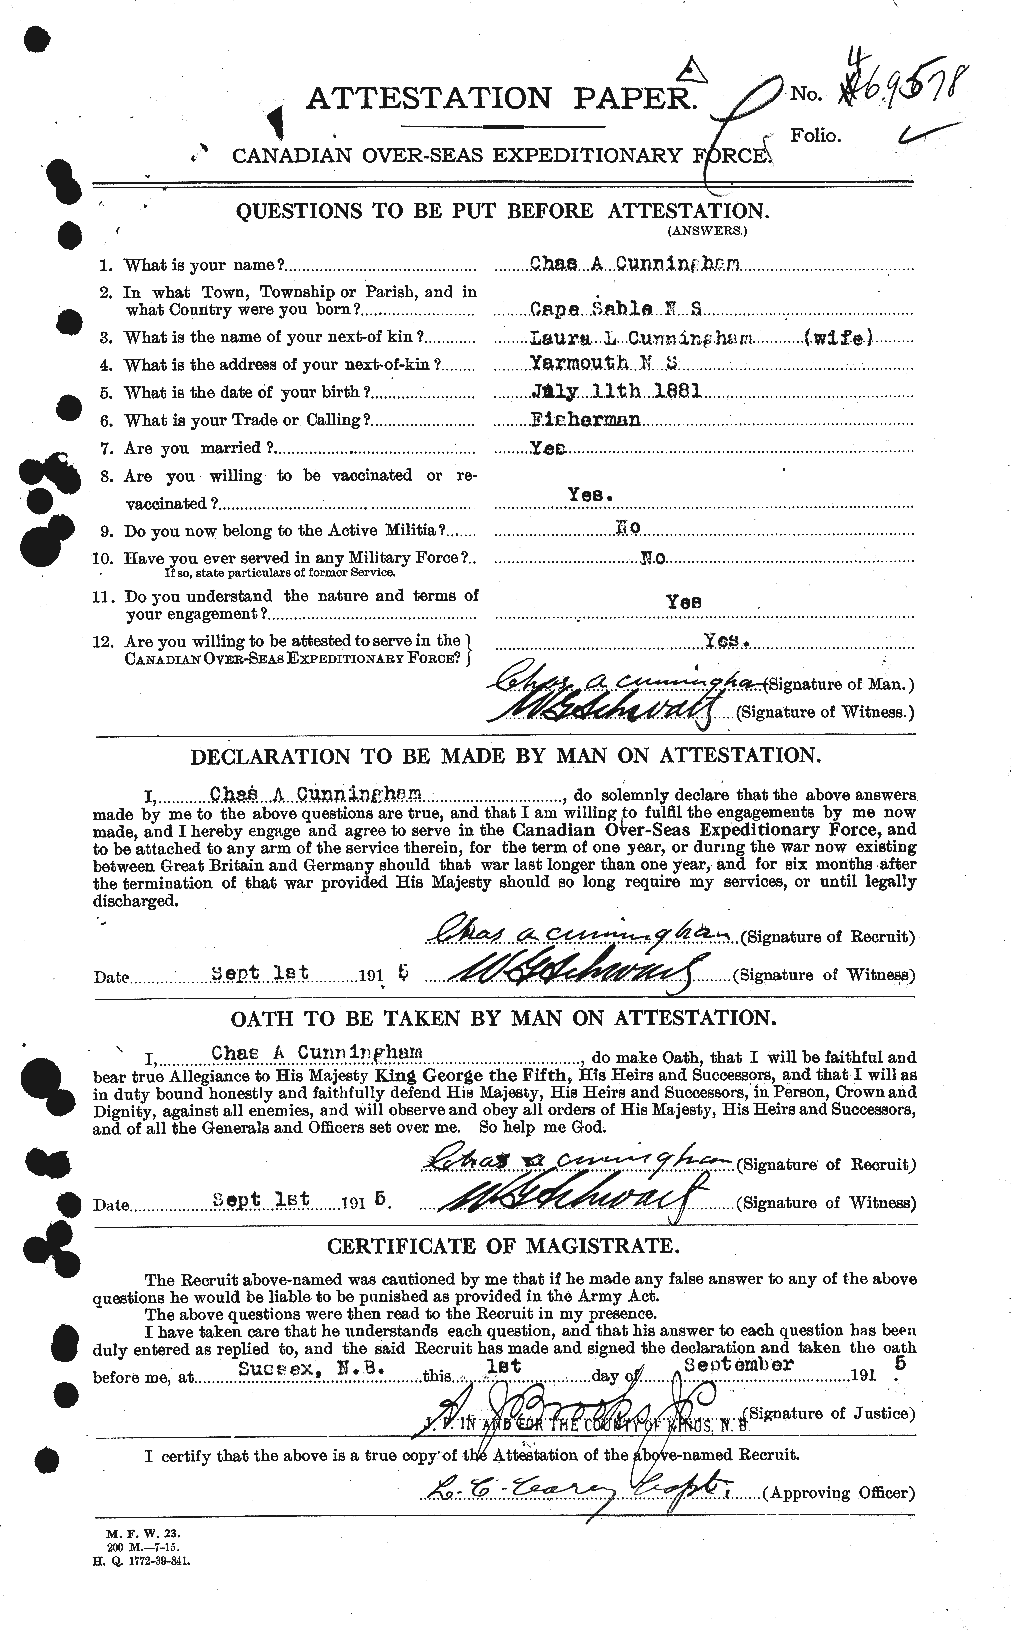 Personnel Records of the First World War - CEF 072034a